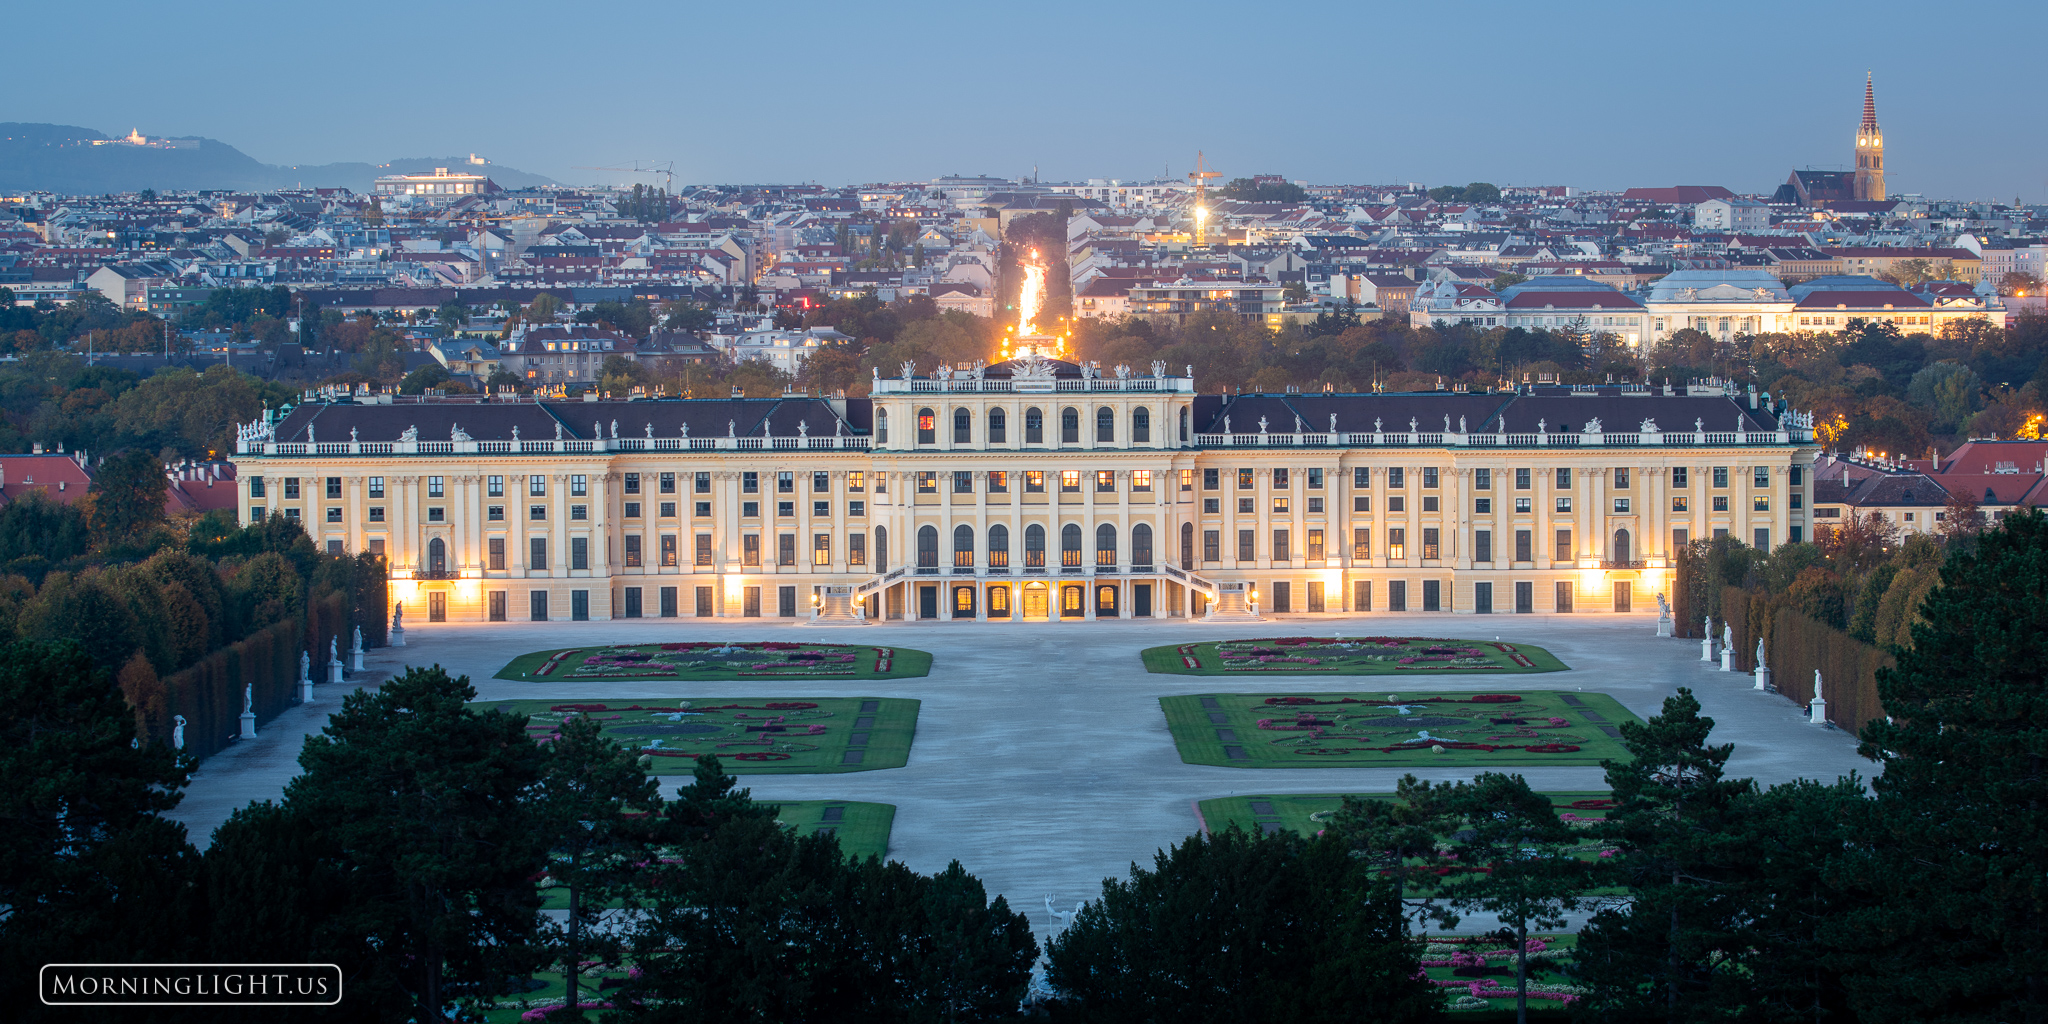 The Schoenbrunn Palace in Austria is all aglow as the sun sets on Vienna.